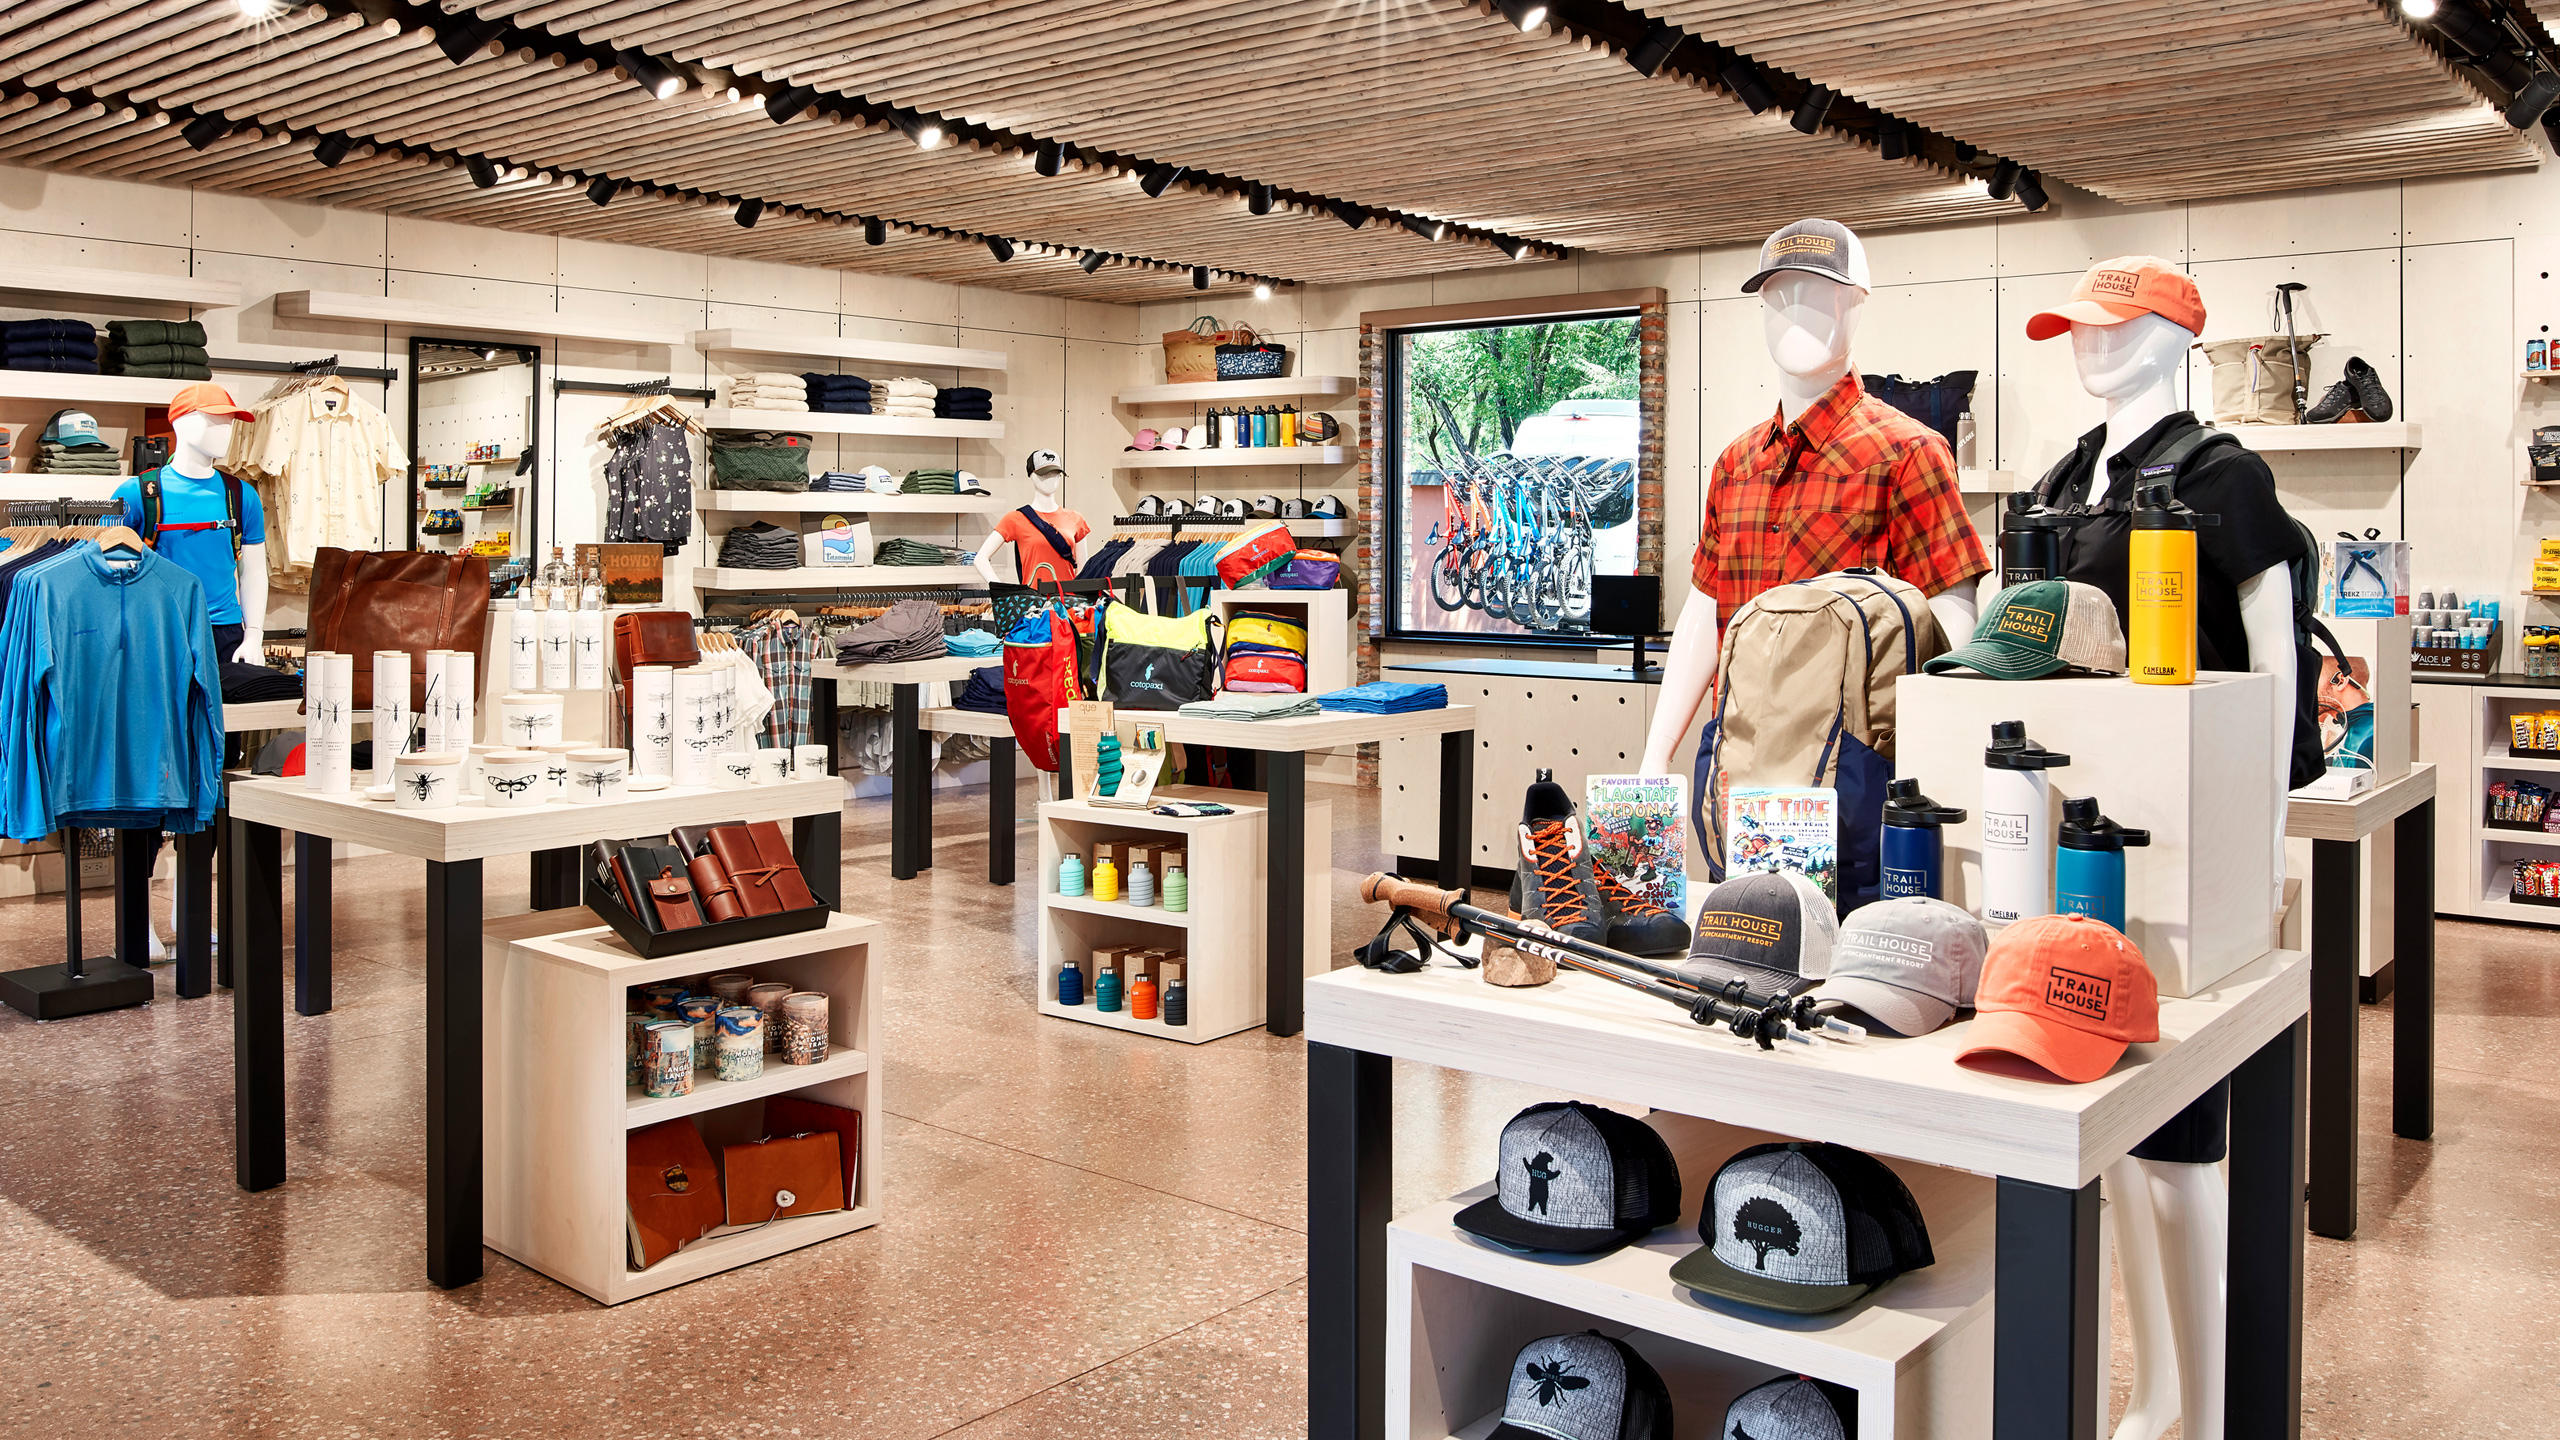 Retail shop with outdoor gear and luxury items